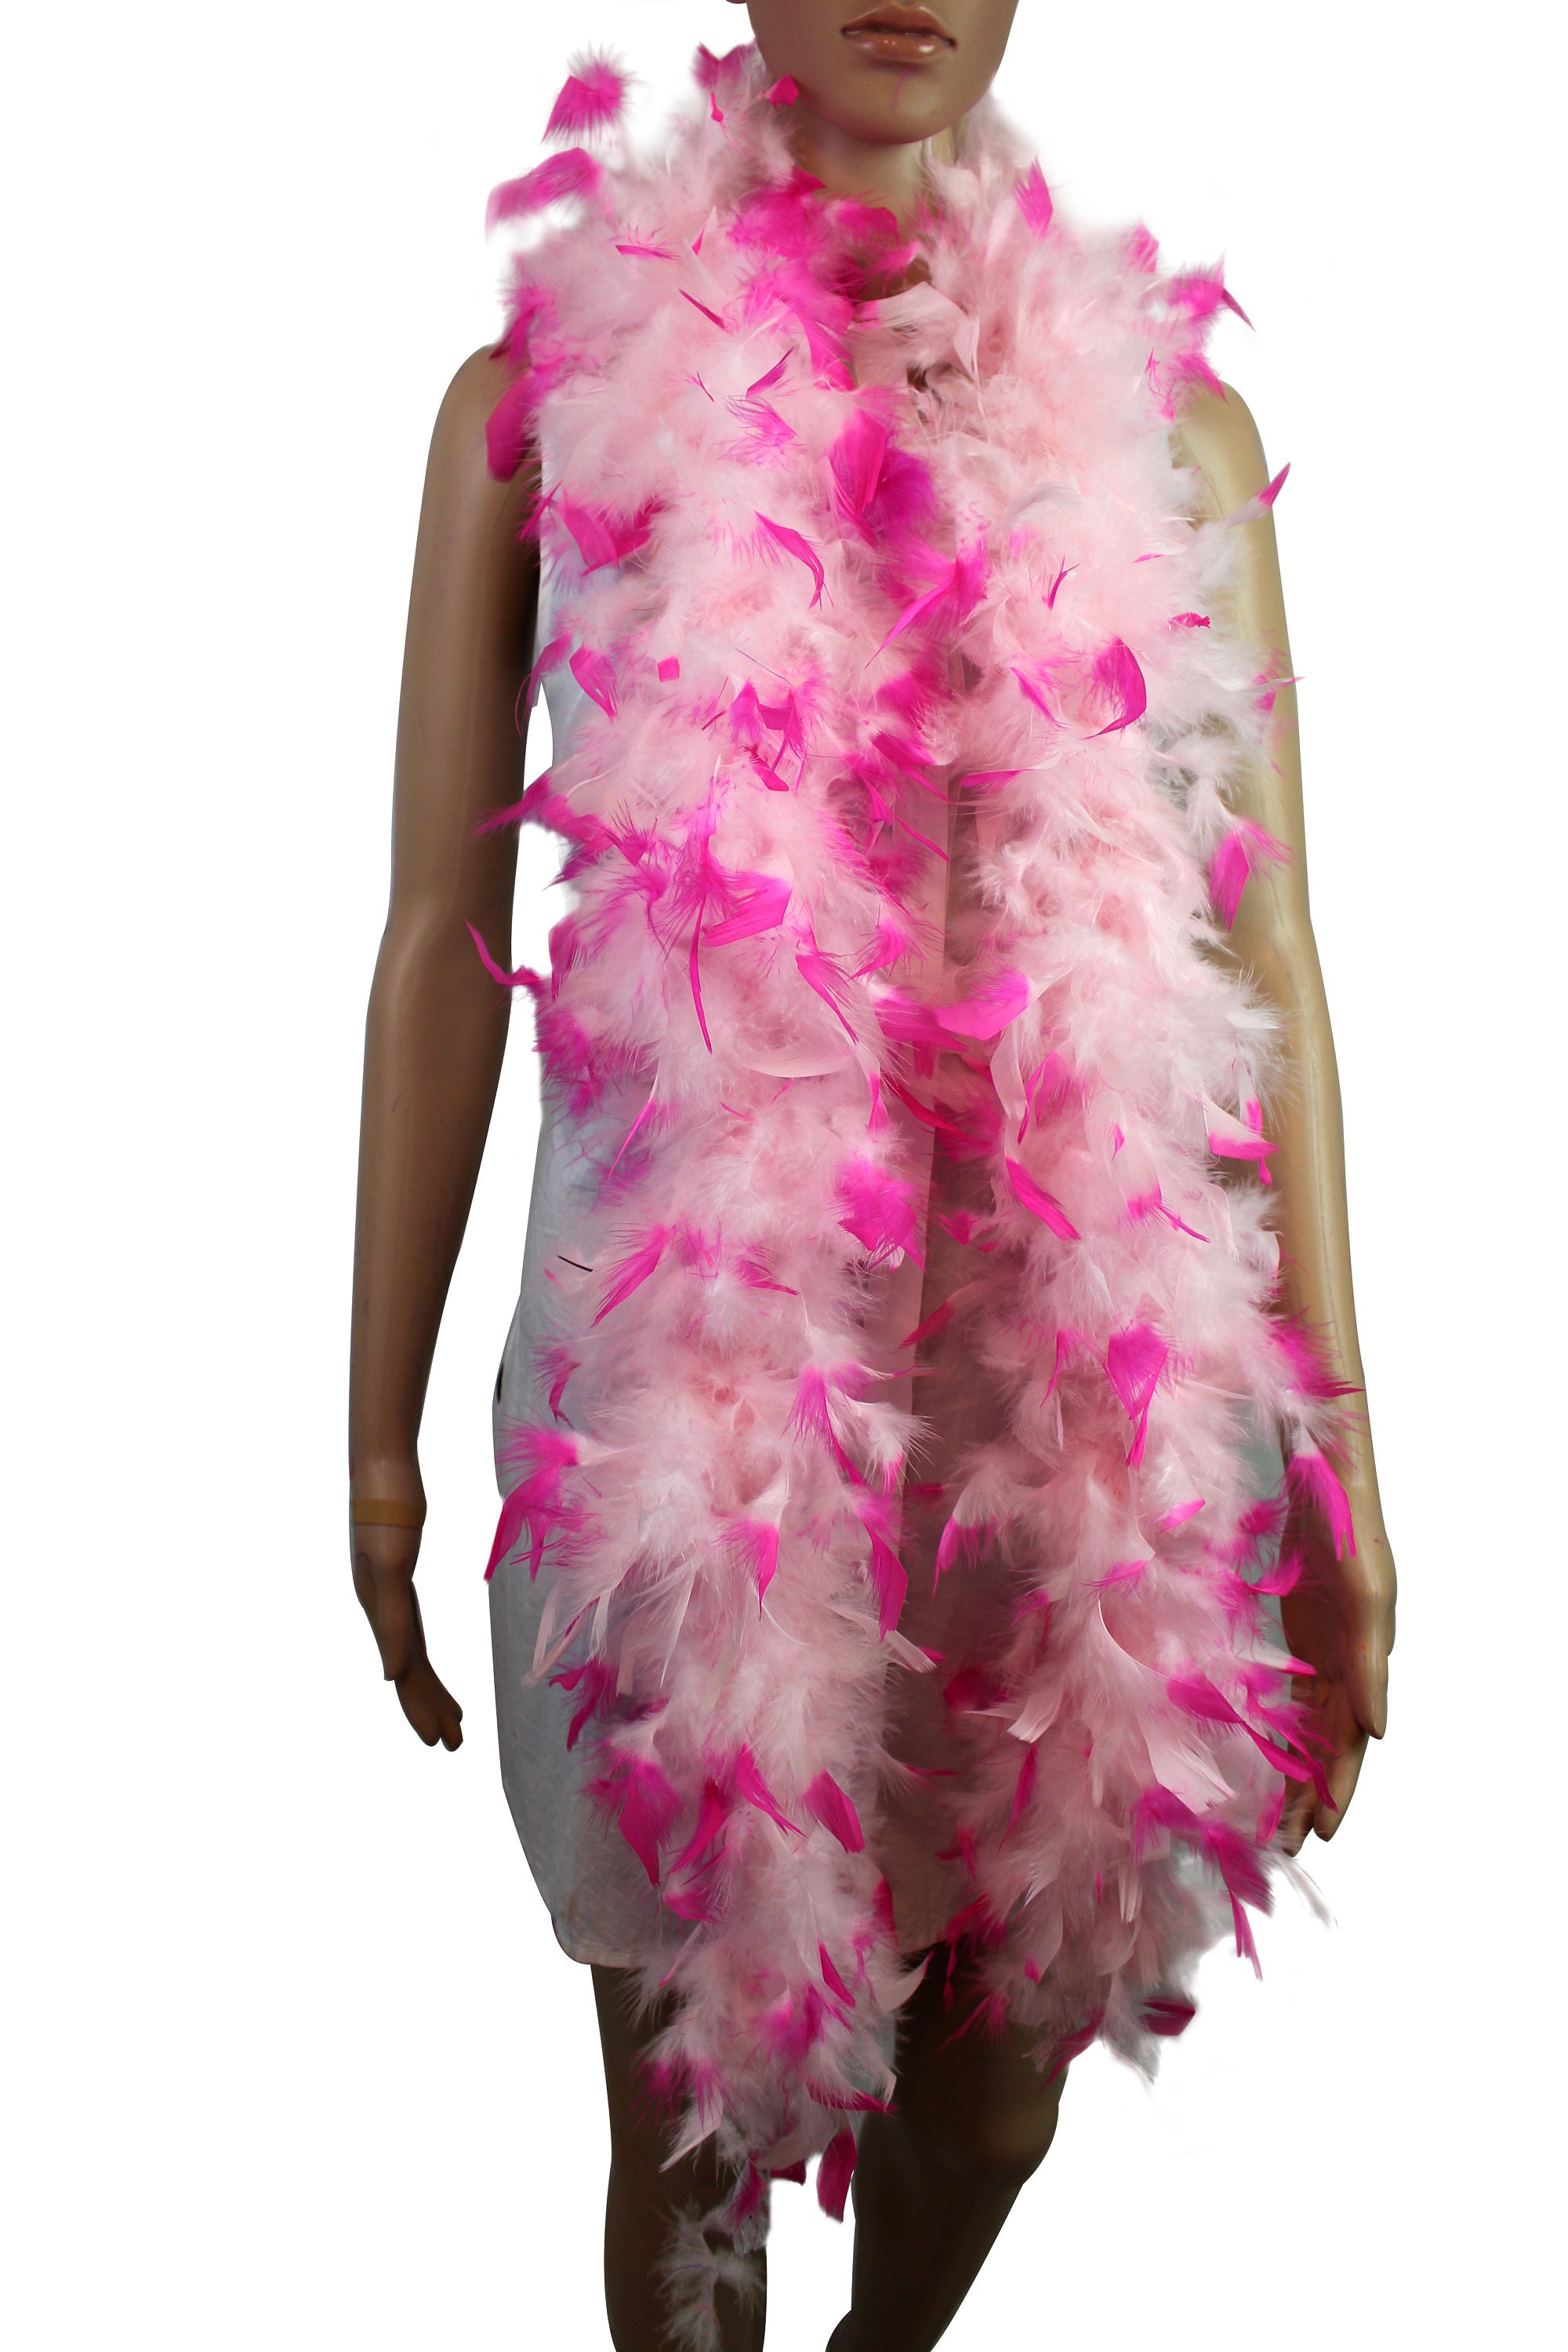 Chandelle Heavyweight Feather Boa Candy Pink